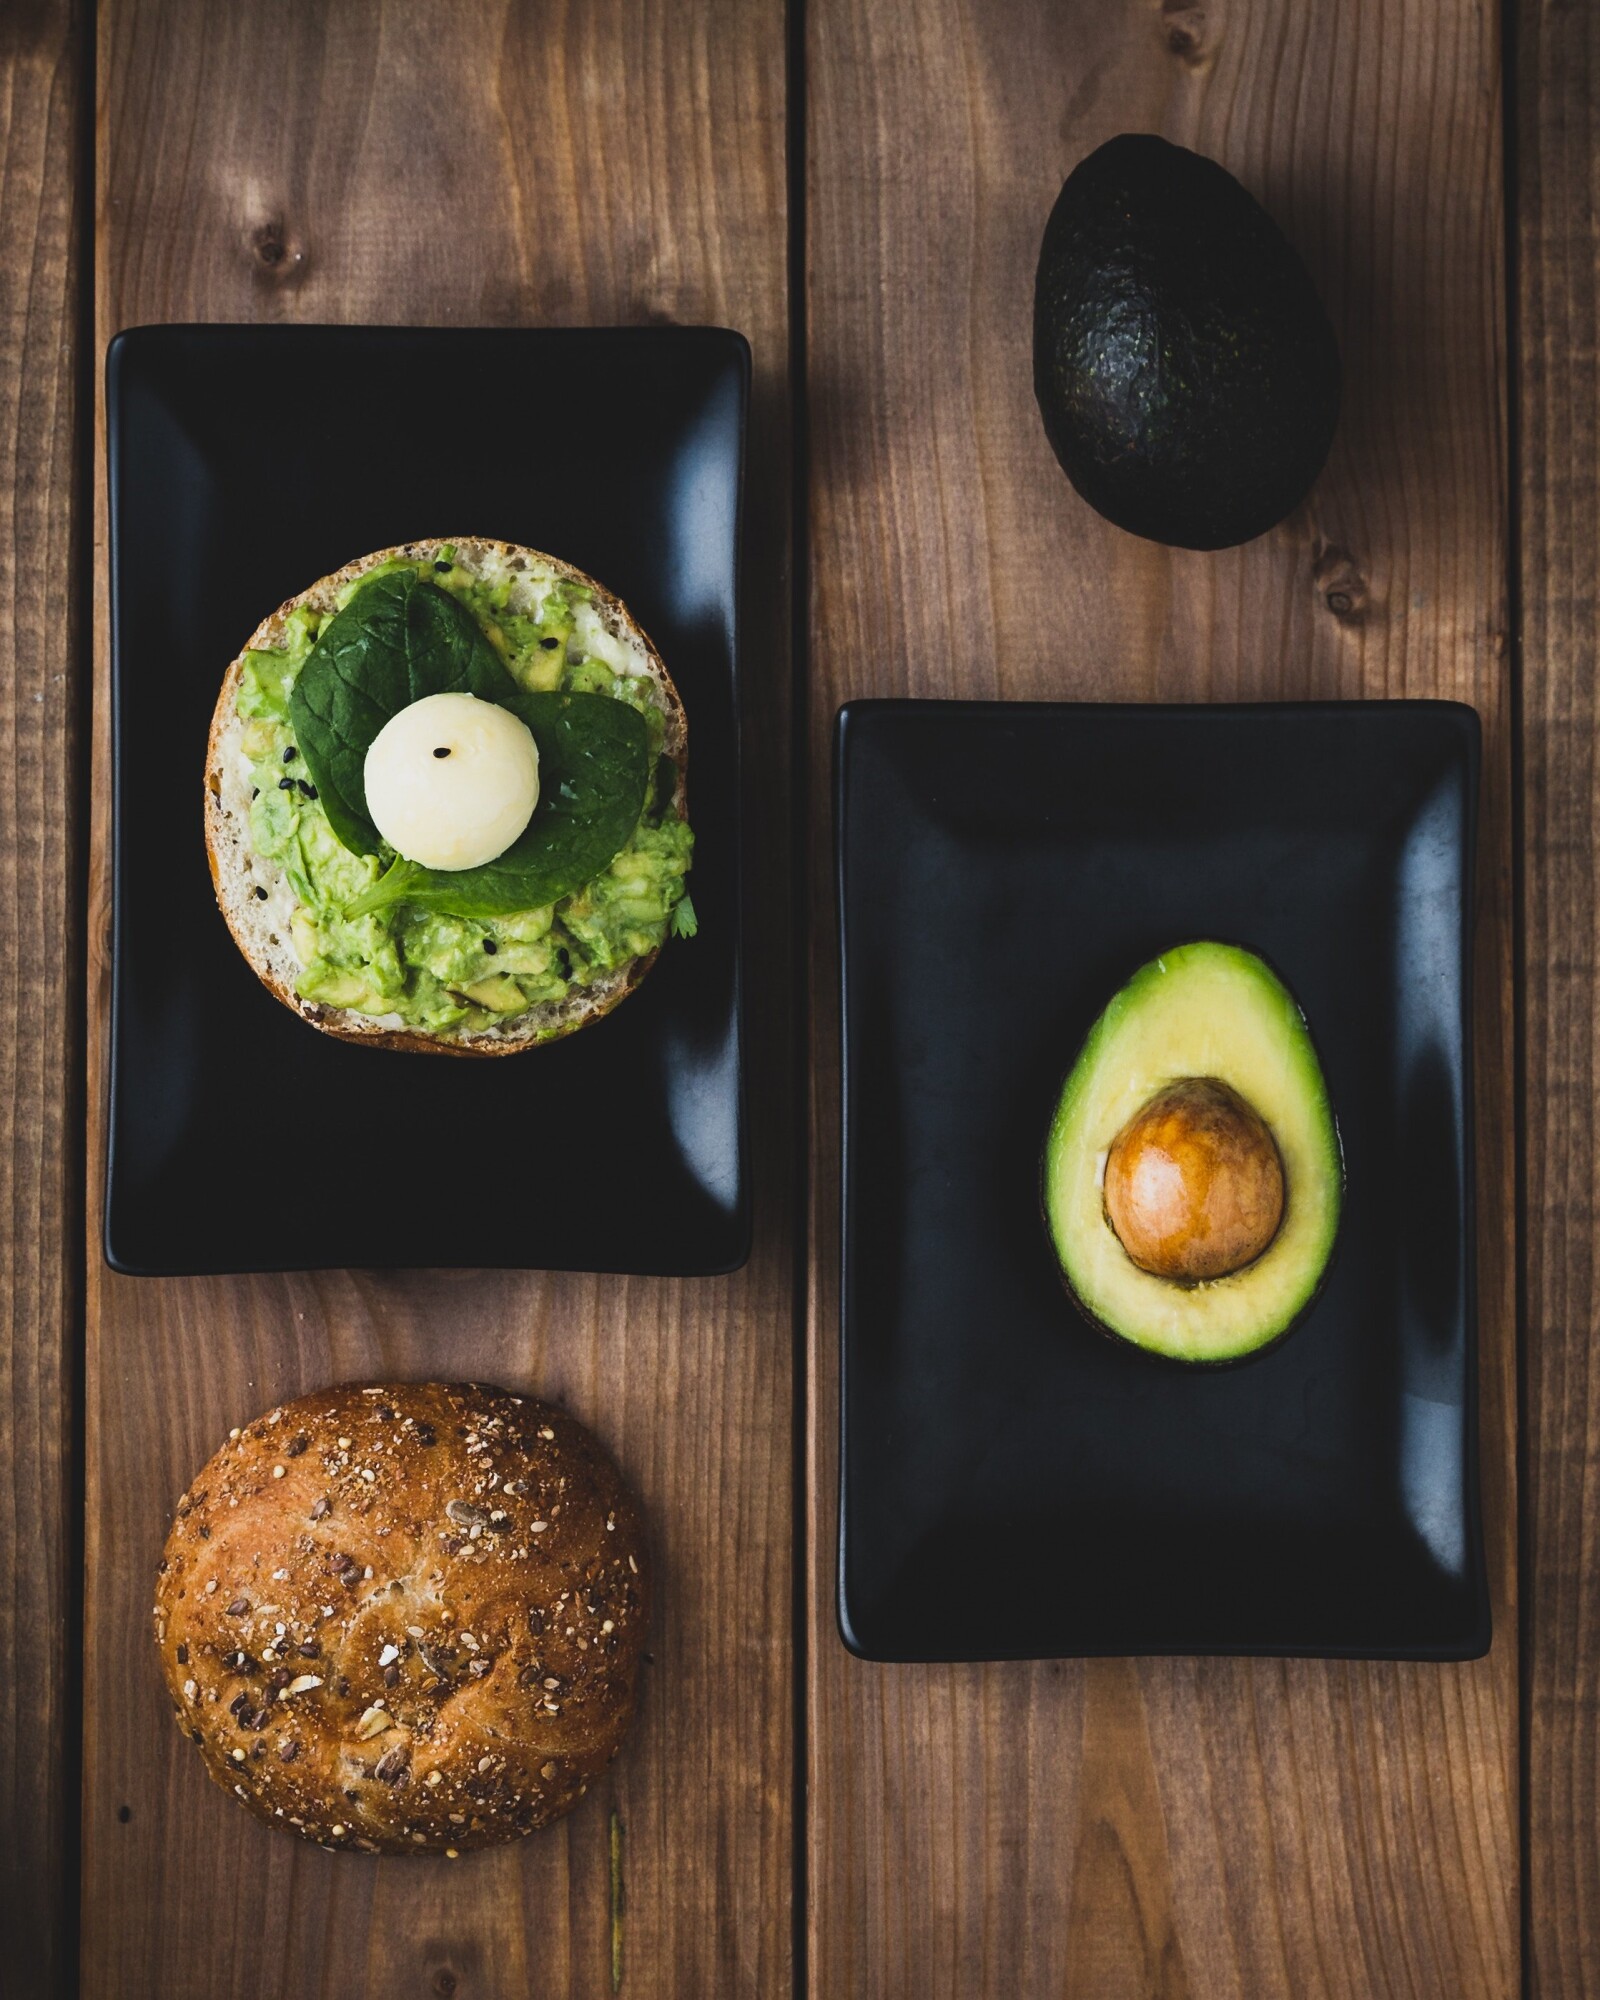 avocado and bread on plates